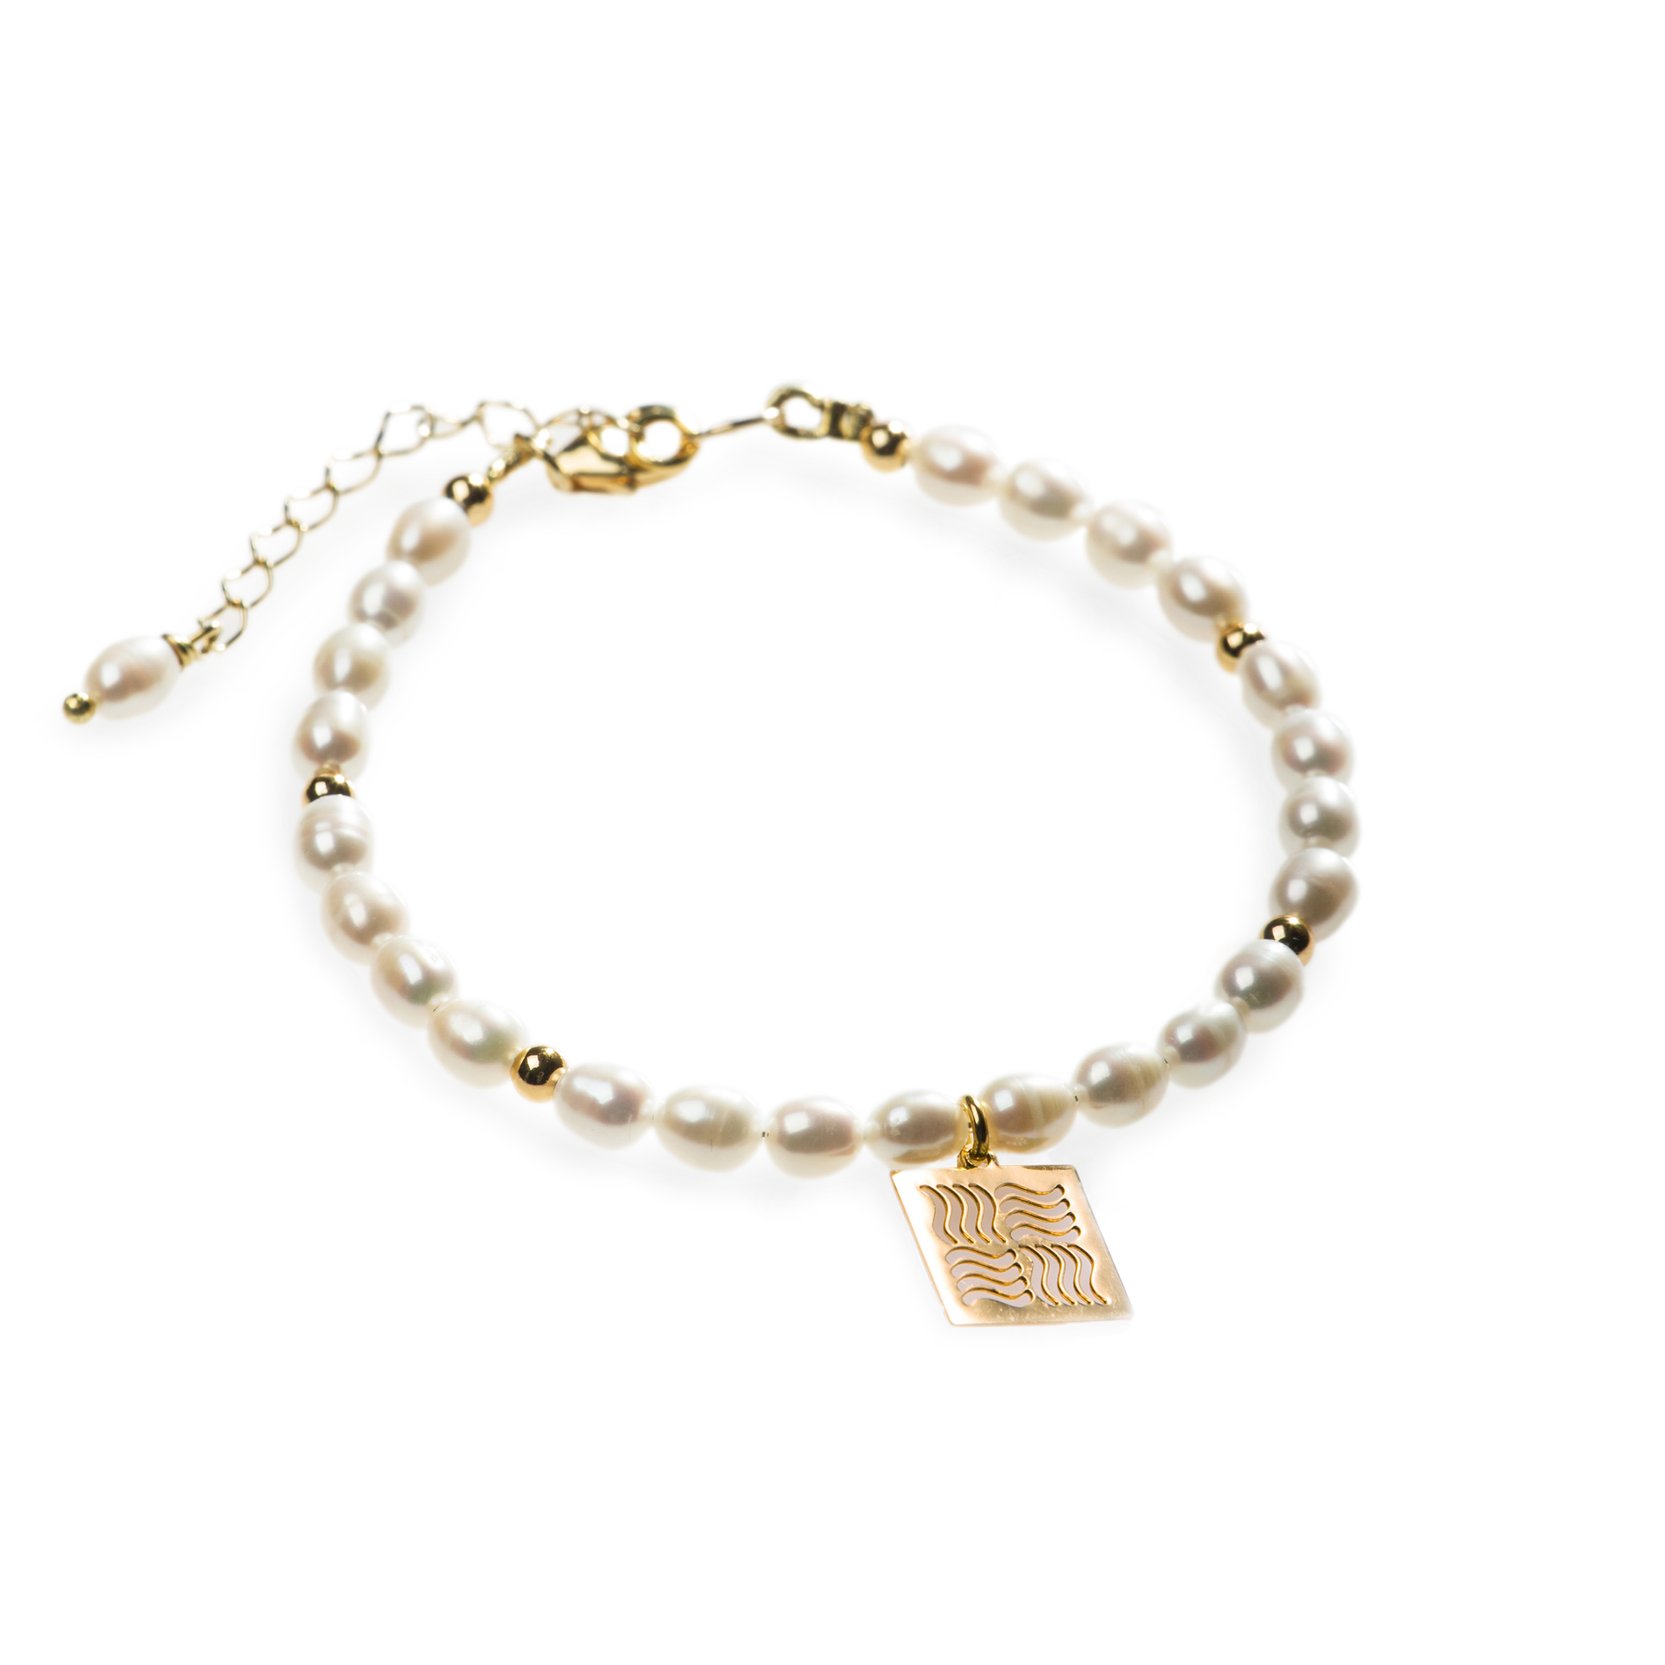 Pearl bracelet with gold-plated branded pendant